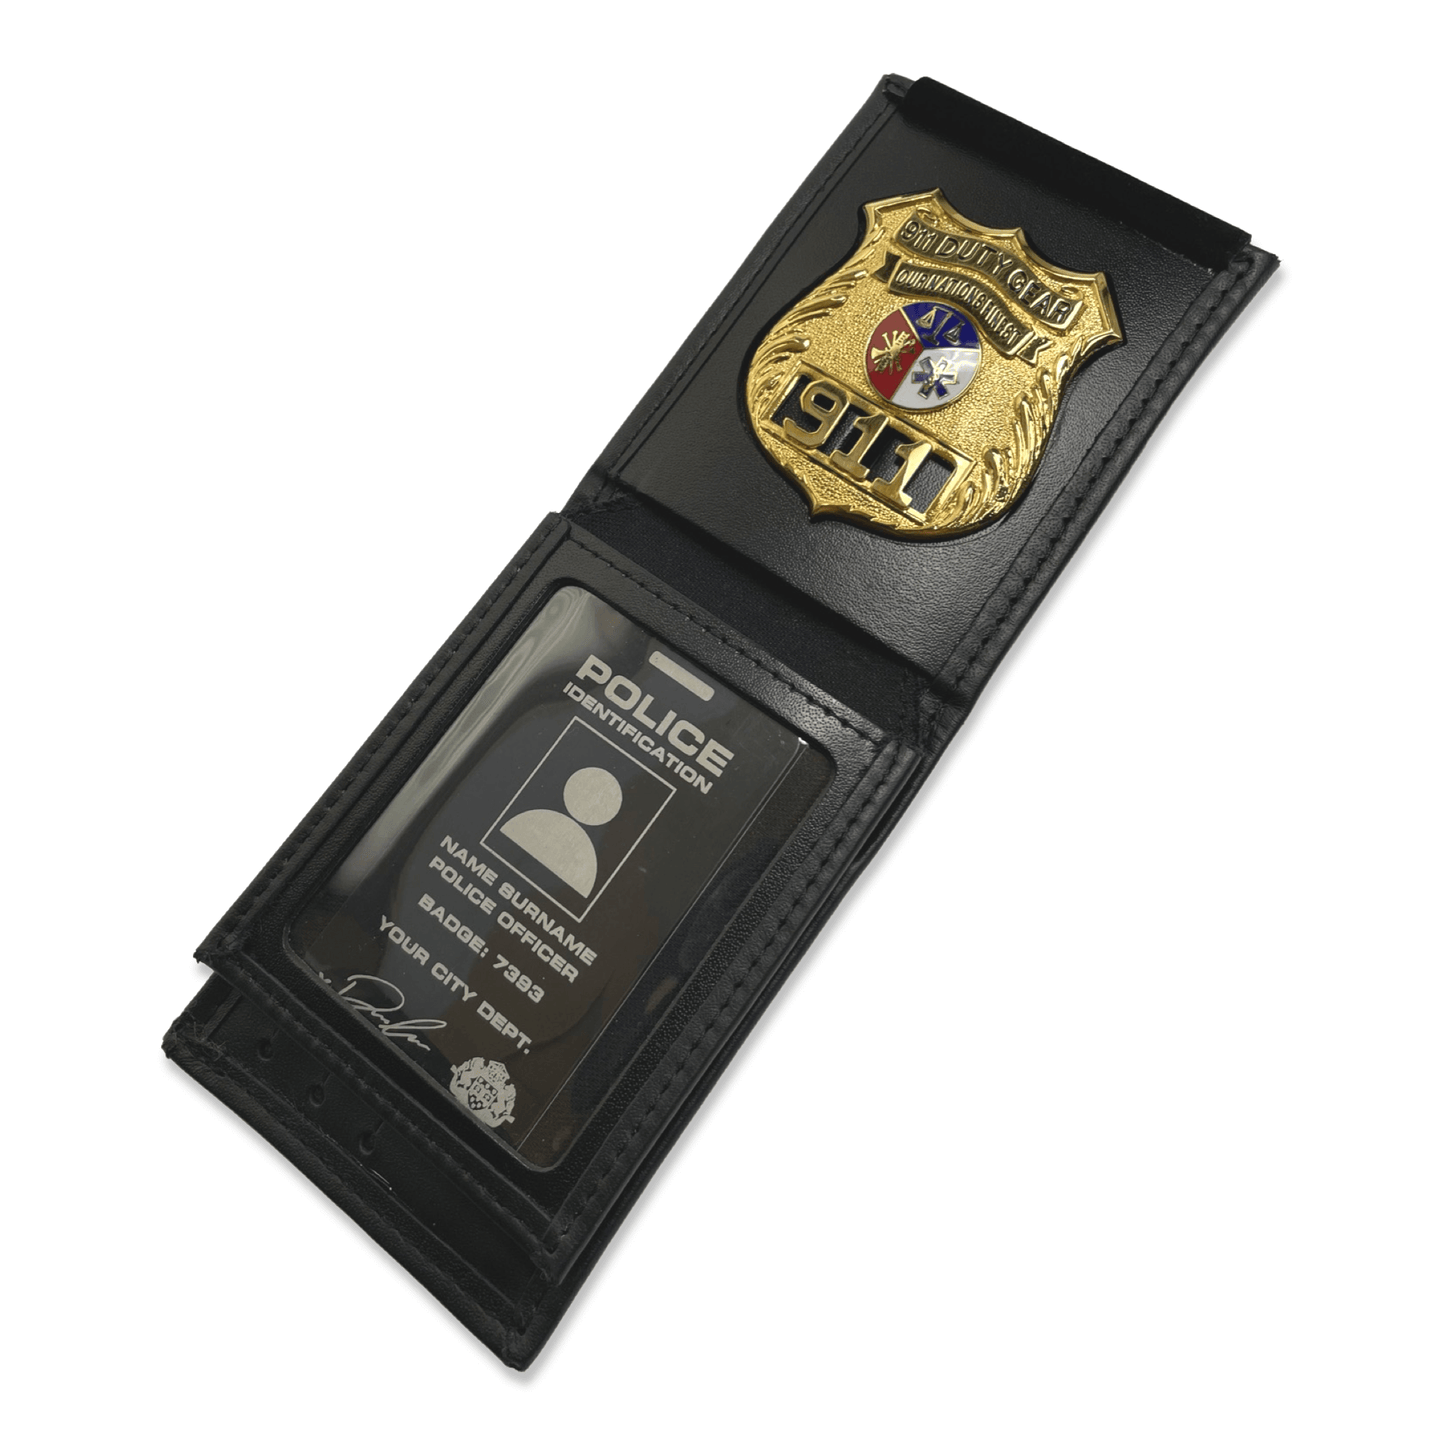 Parliamentary Protective Service PPS SPP Hidden Badge Wallet